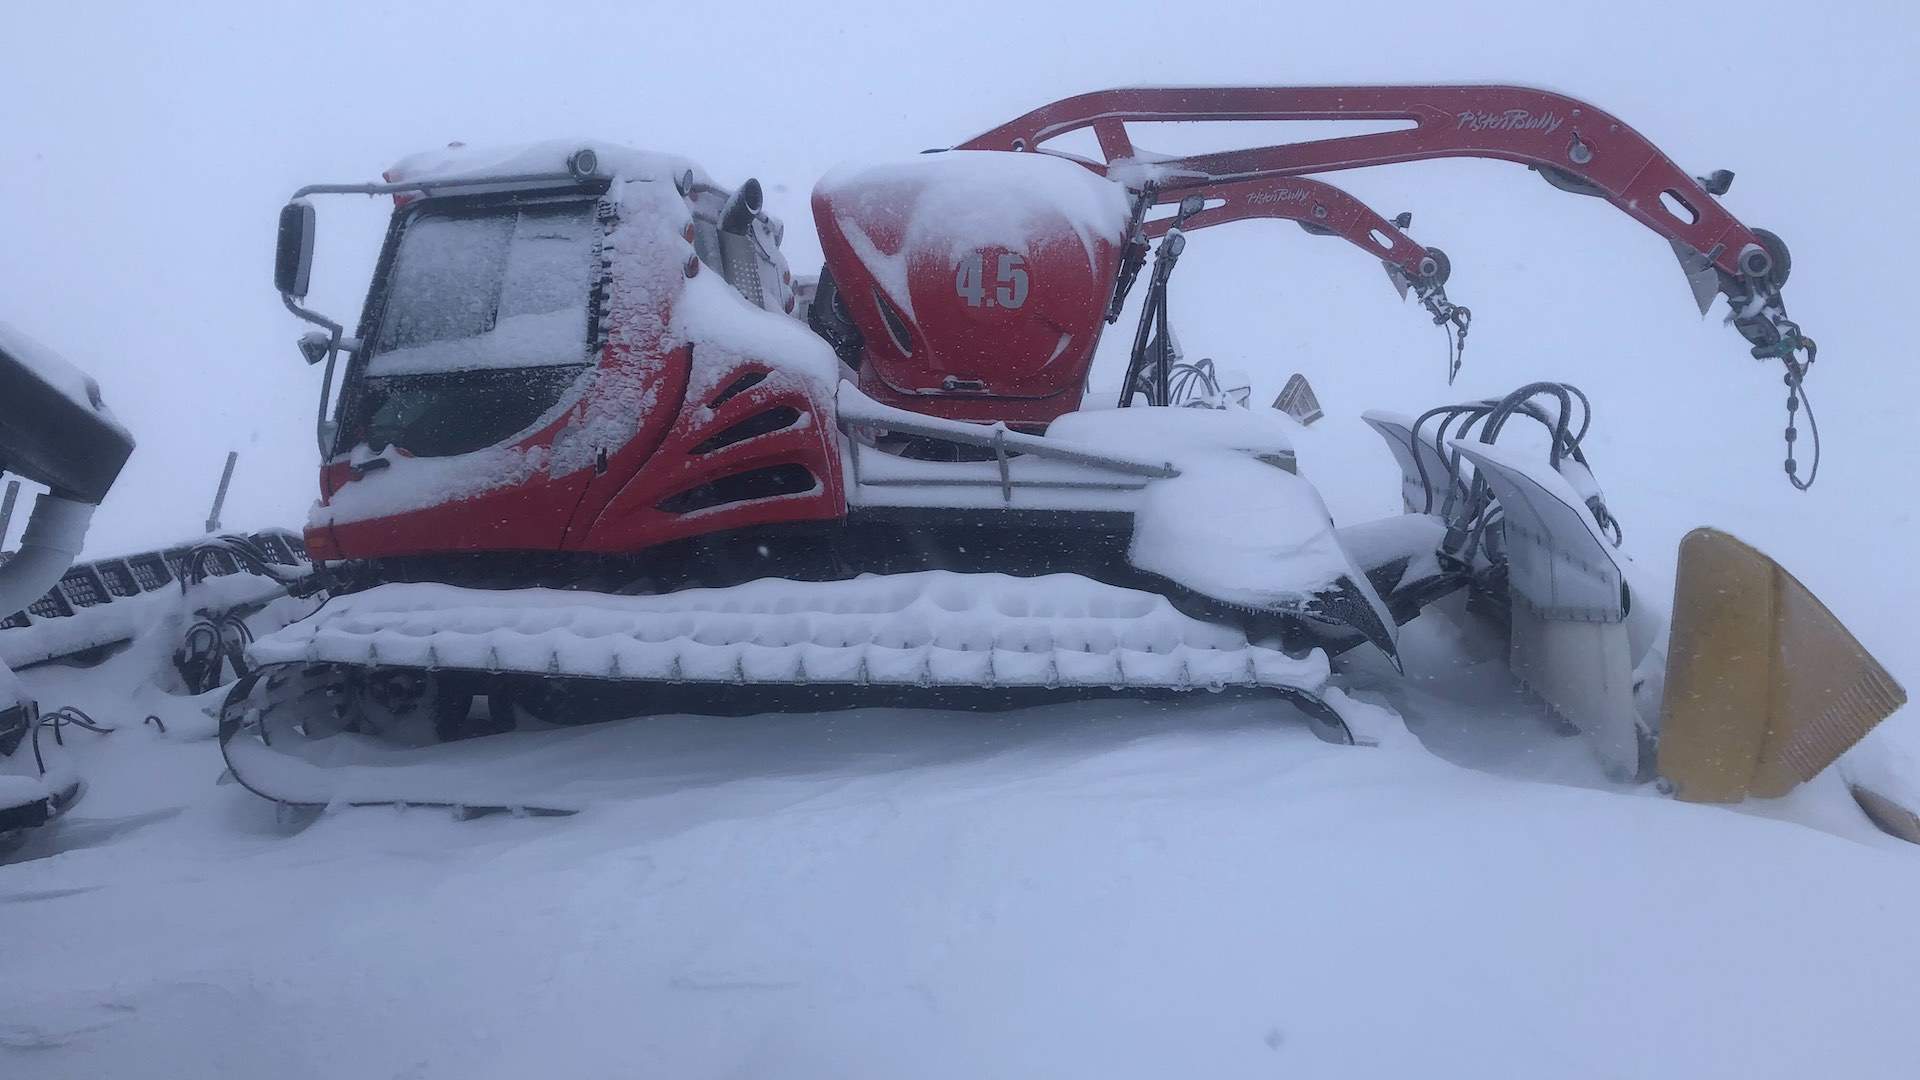 Attention Snow Fiends: Mt Ruapehu Got a Snow Dump So Big That Some Ski Fields Are Opening Early